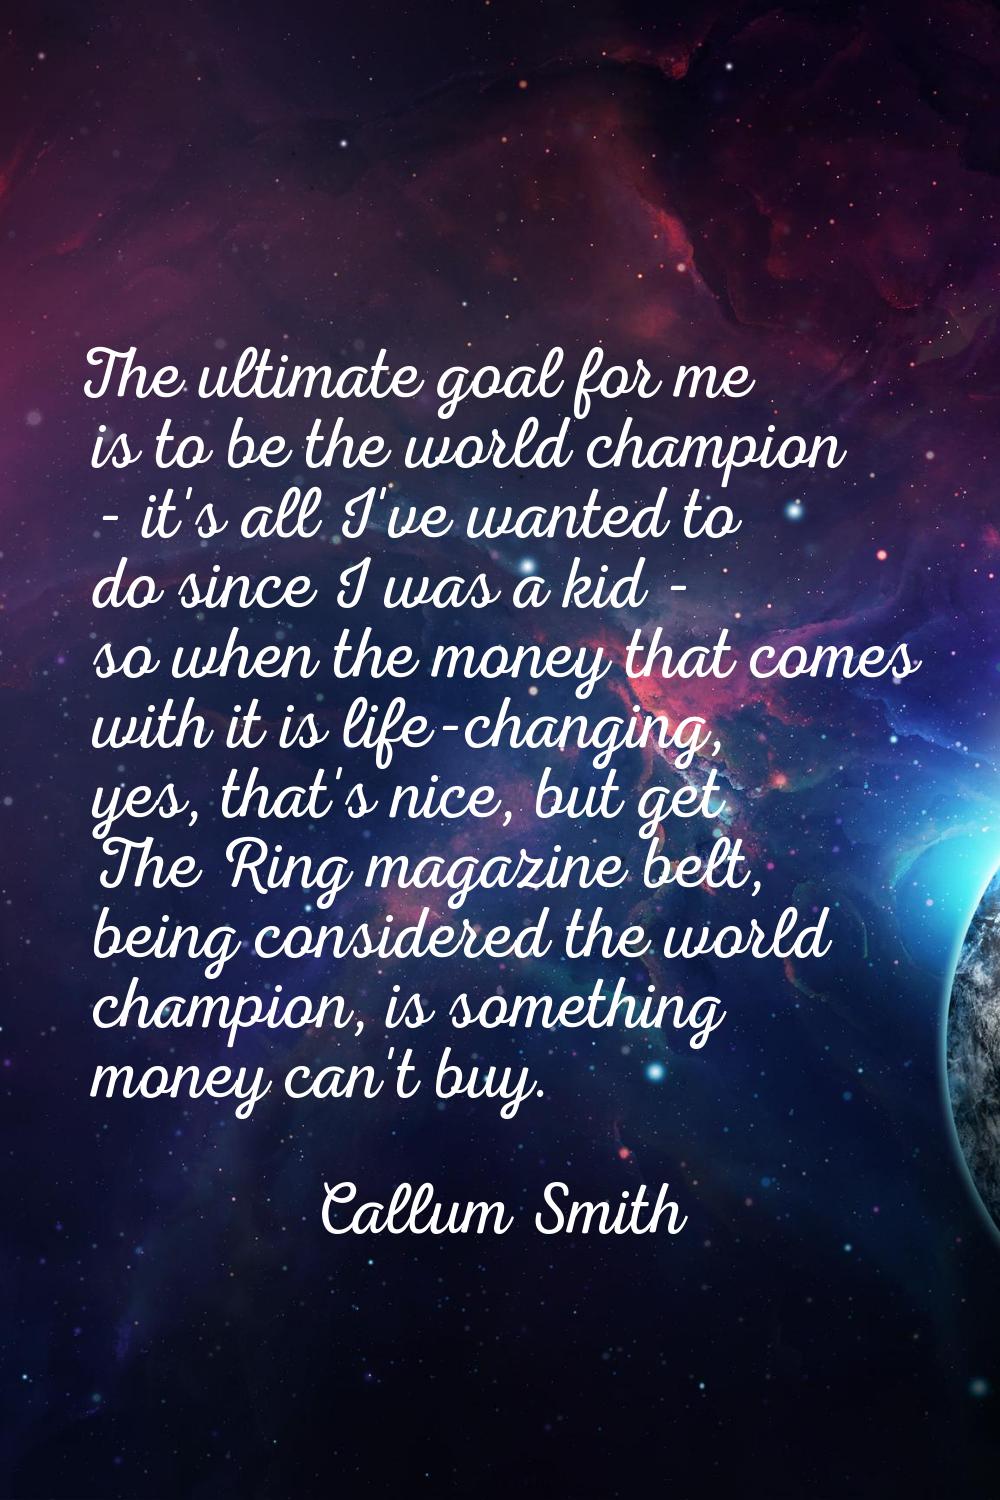 The ultimate goal for me is to be the world champion - it's all I've wanted to do since I was a kid